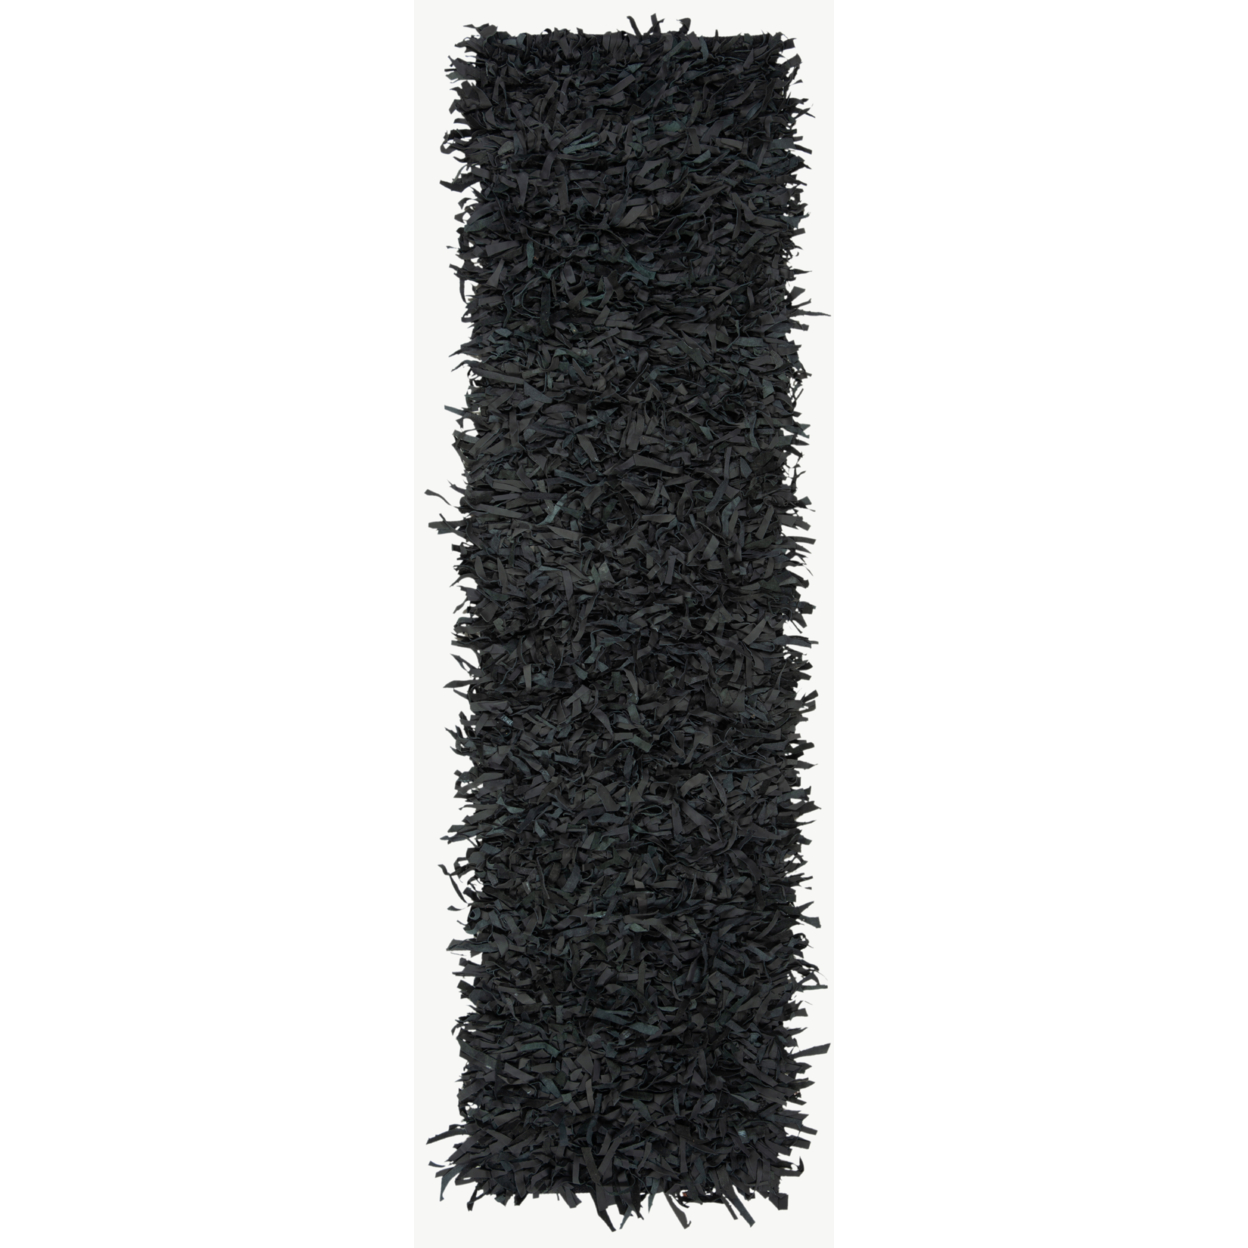 SAFAVIEH Leather Shag LSG601A Hand-knotted Black Rug - 6' X 9'